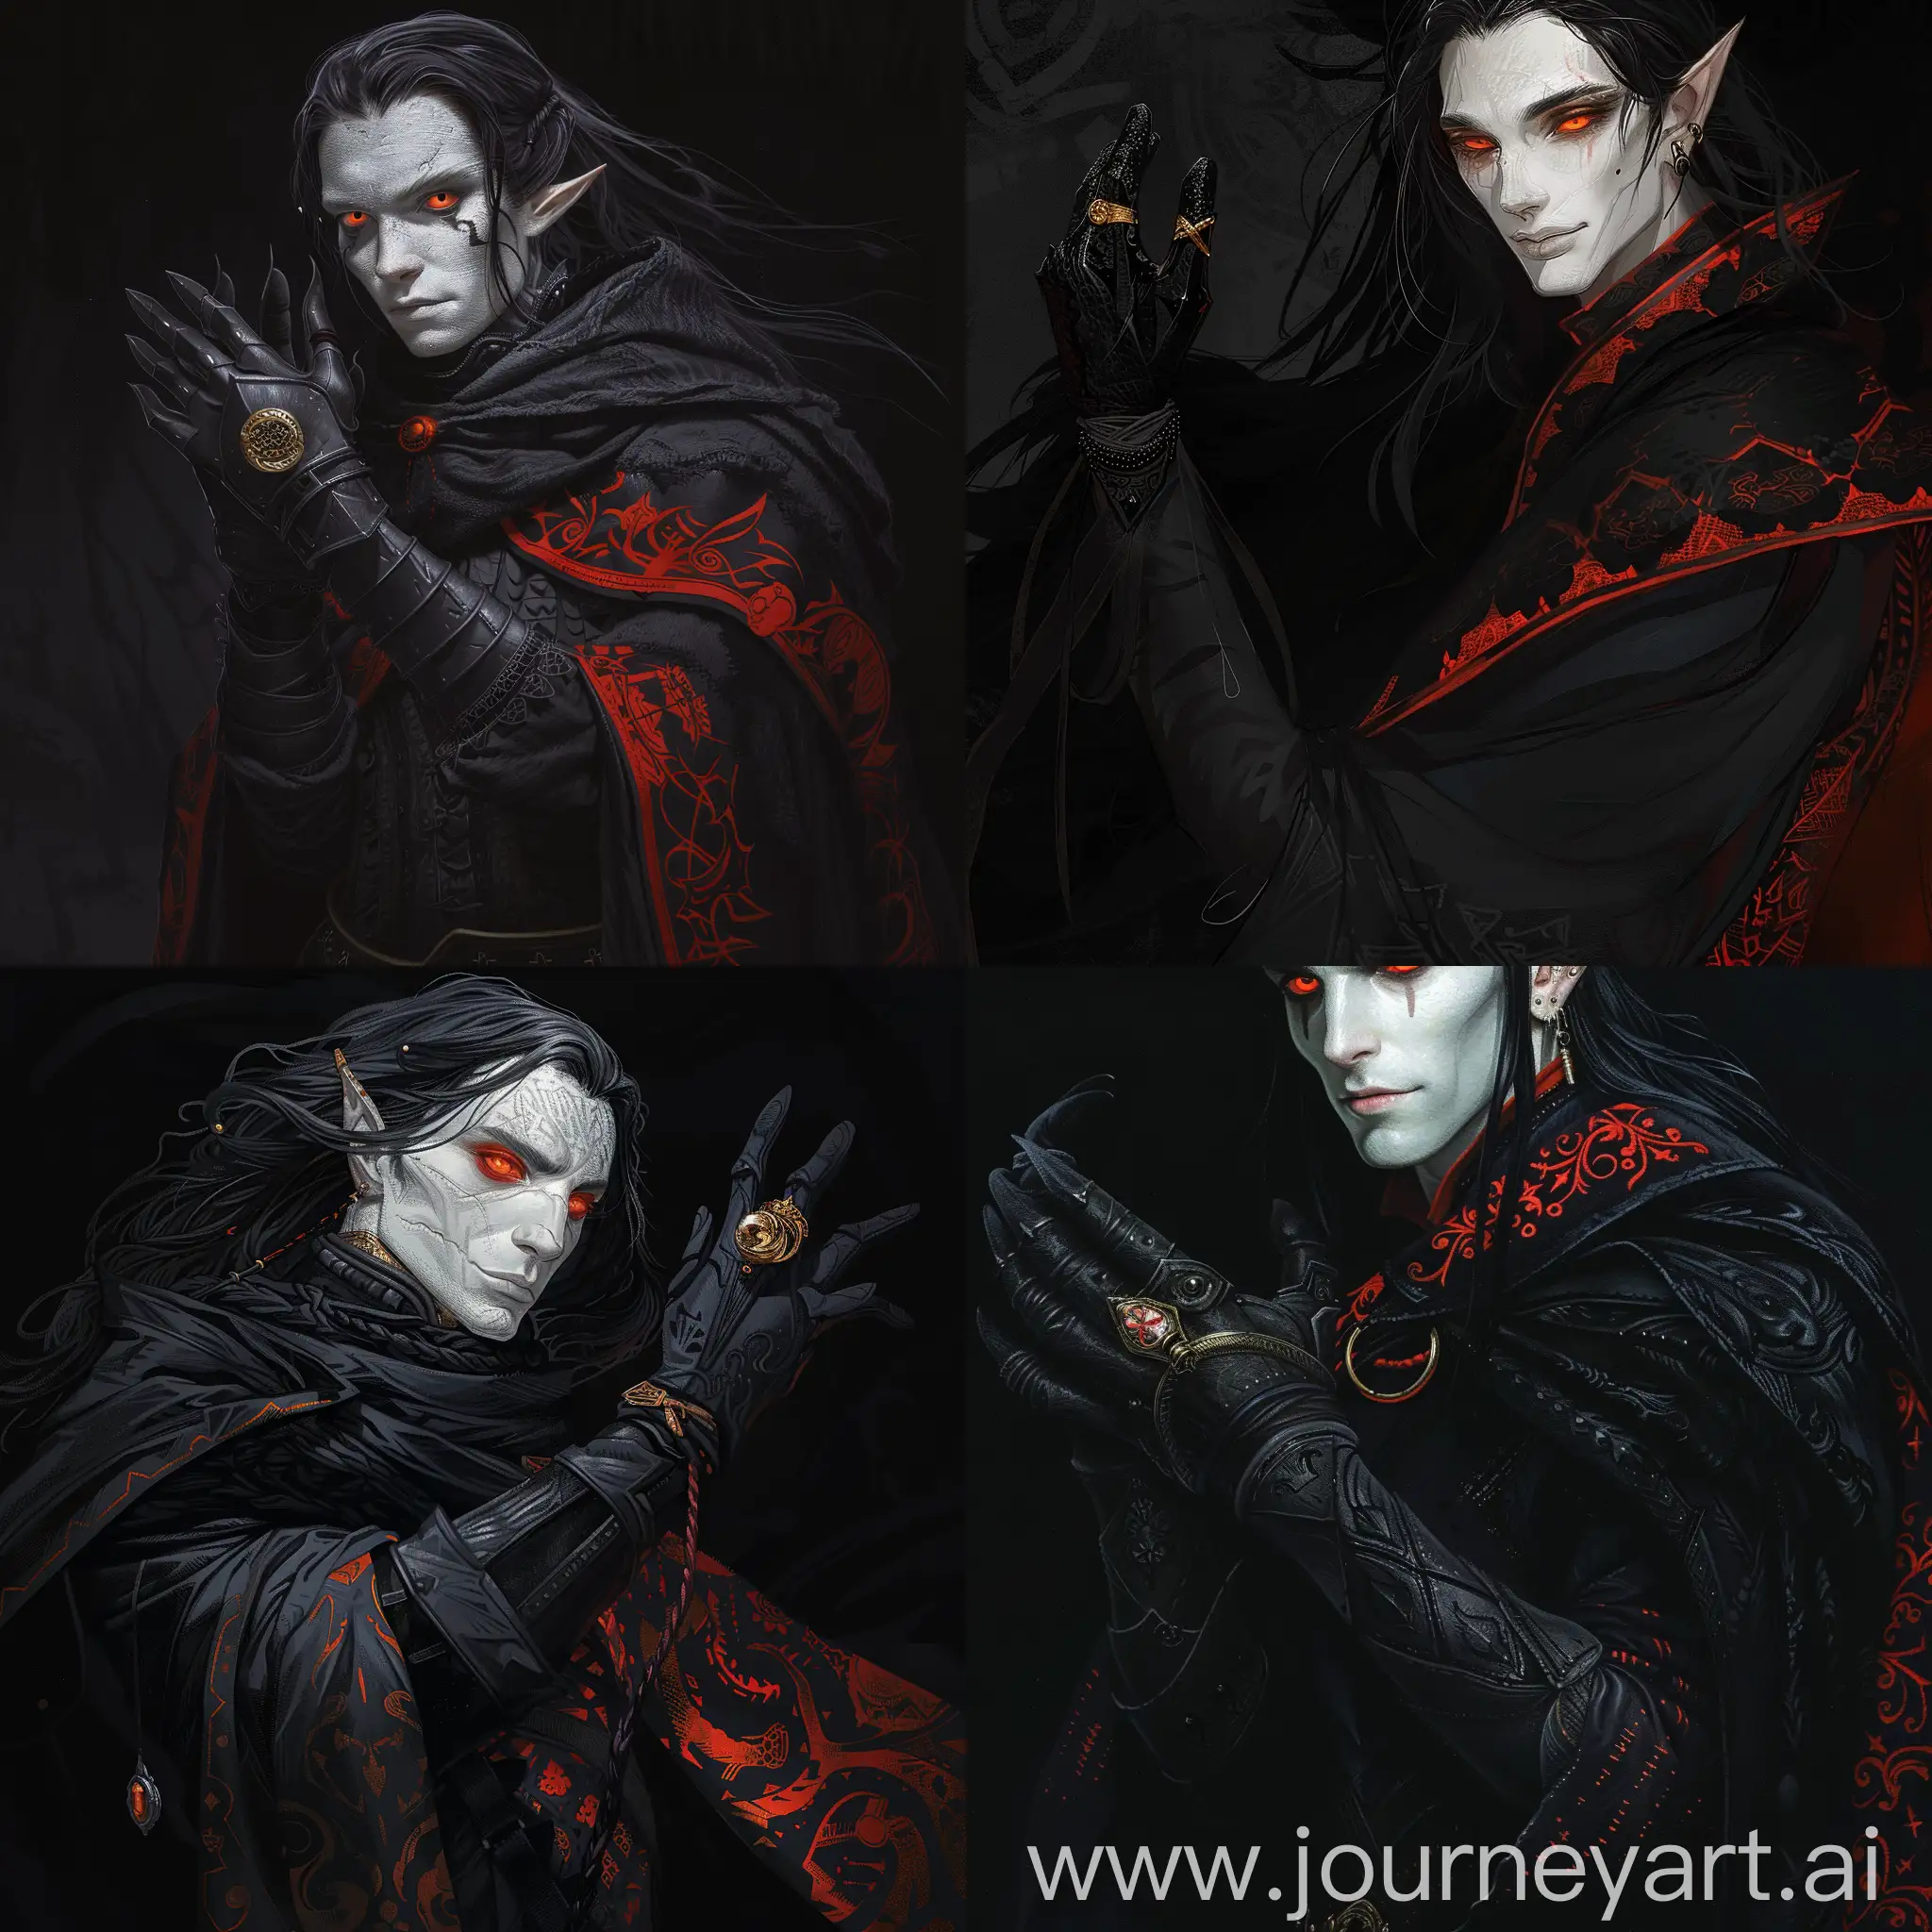 dnd white pale skin with orange eyes,long black hair,black cape with black clothes and red patterns on his clothes,wearing a black glove with a golden ring on glove.background is dark black night.